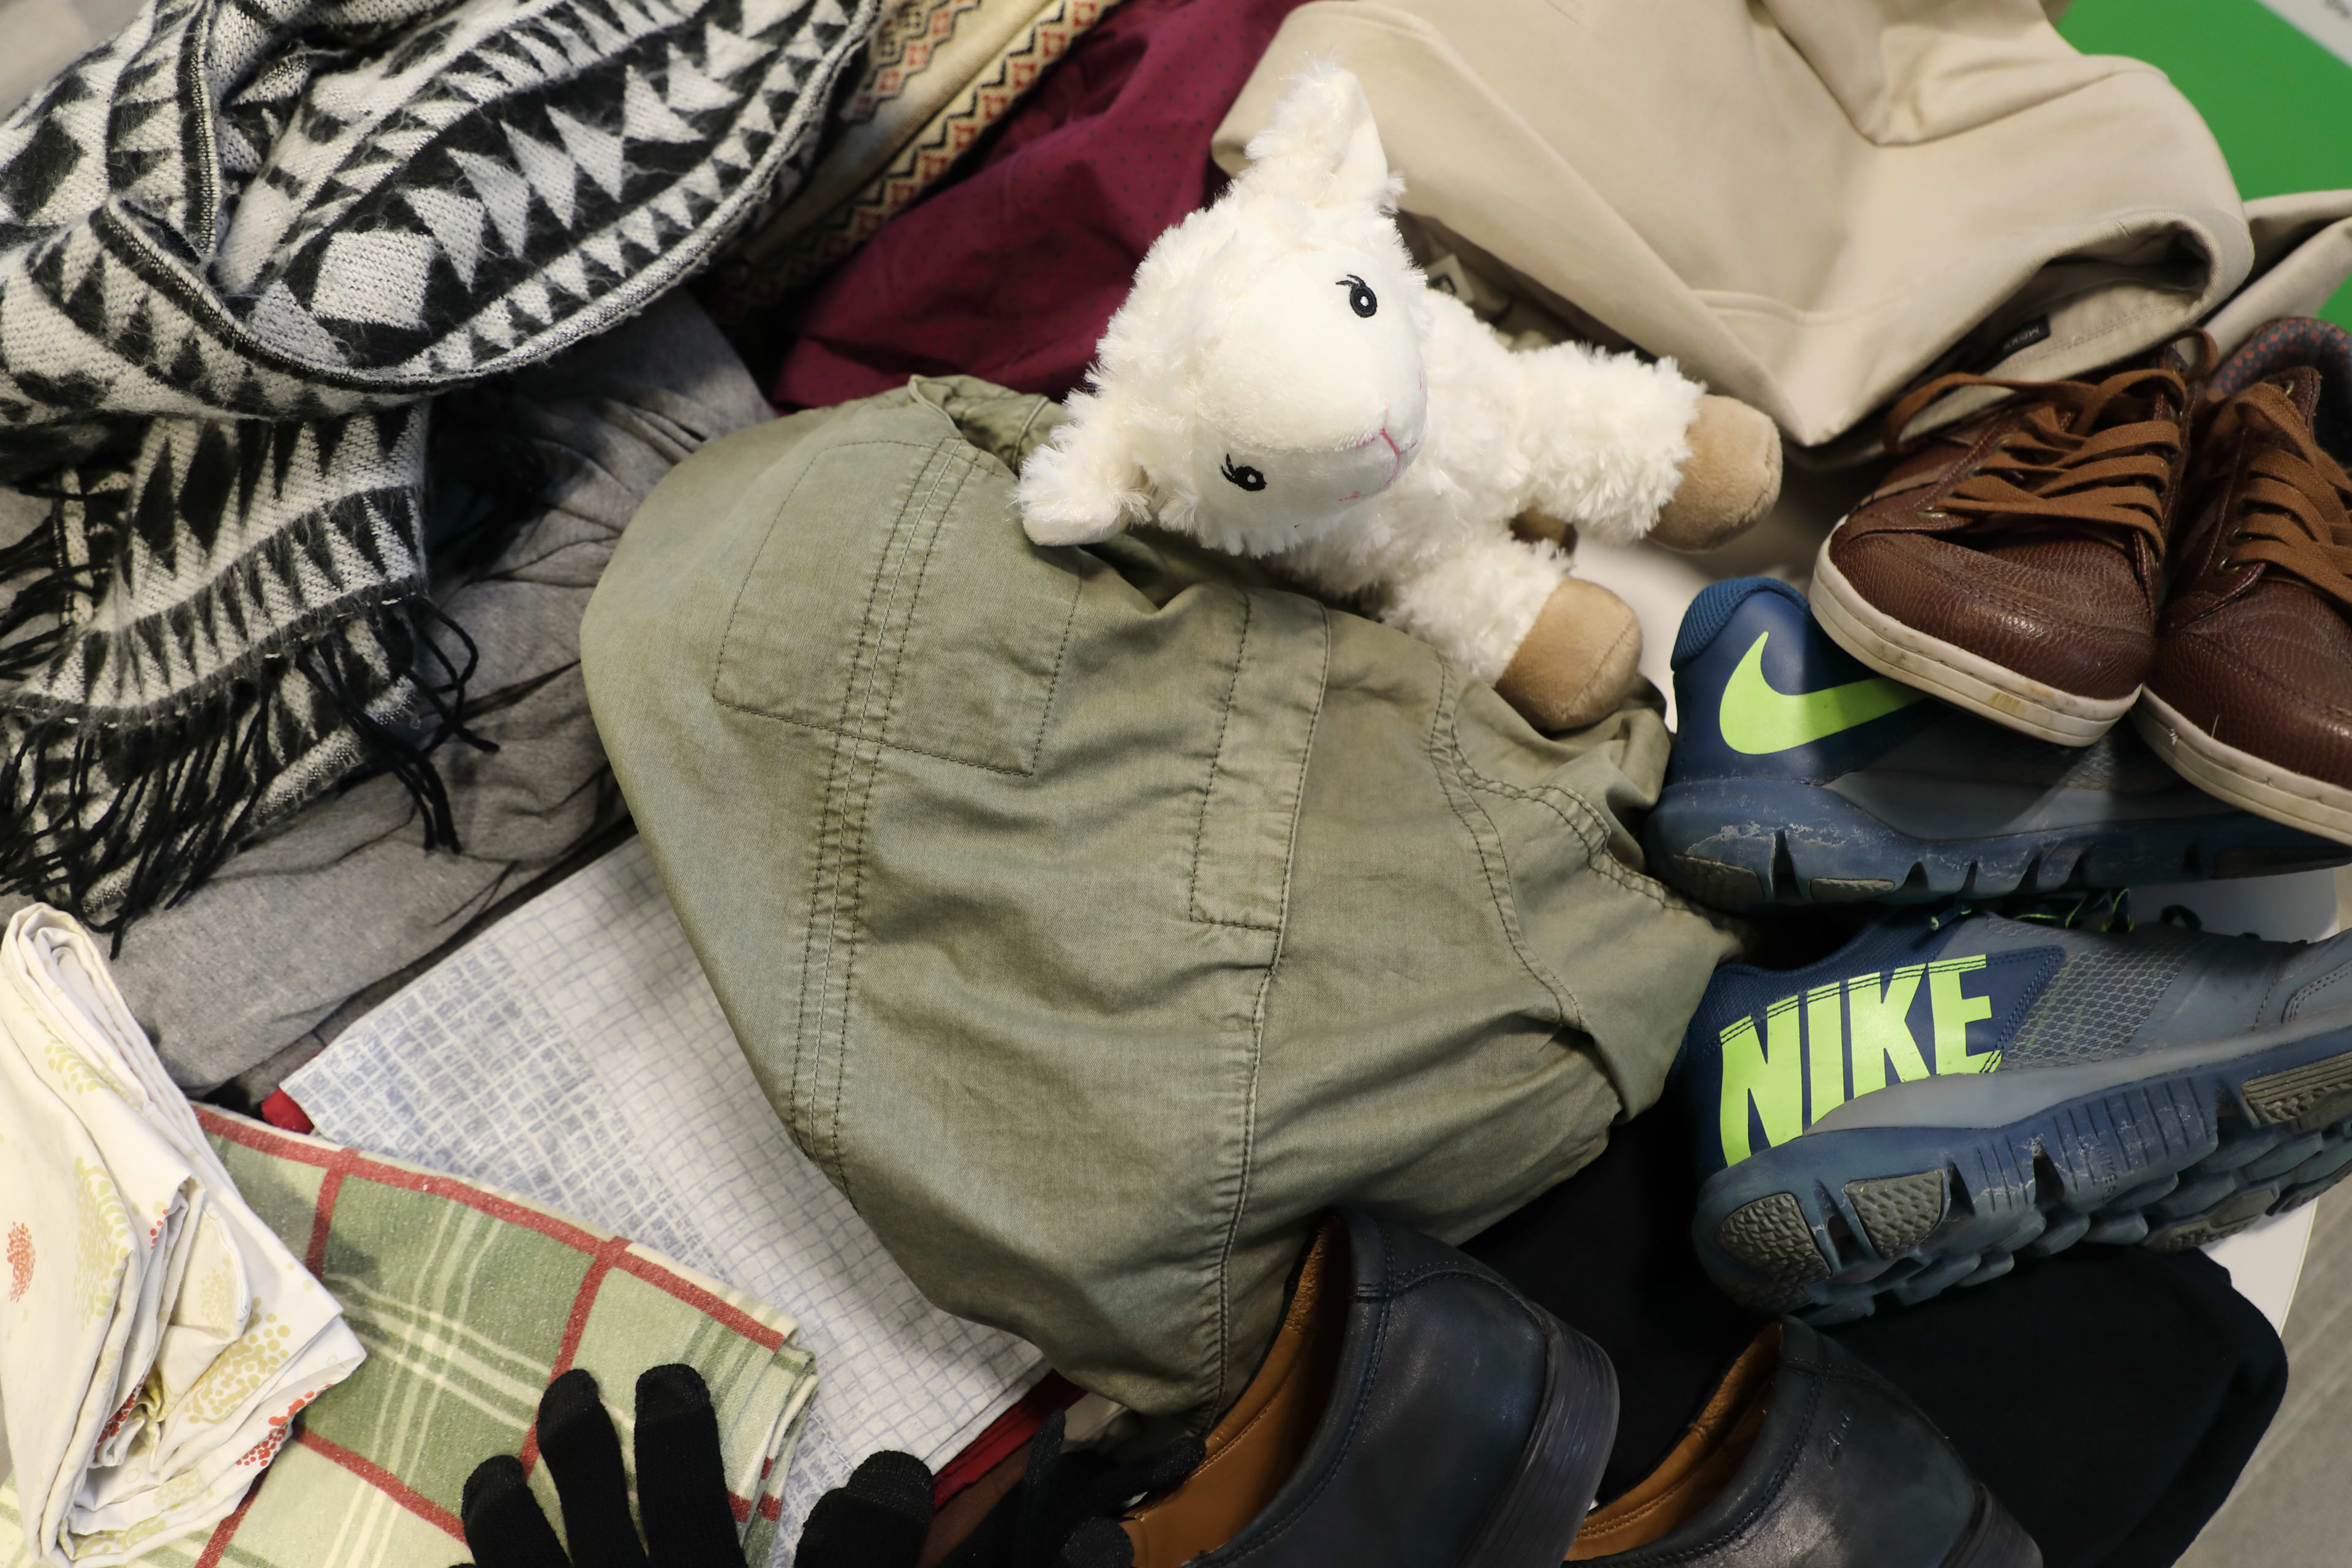 close up on a pile of textiles, shoes, stuffed animals